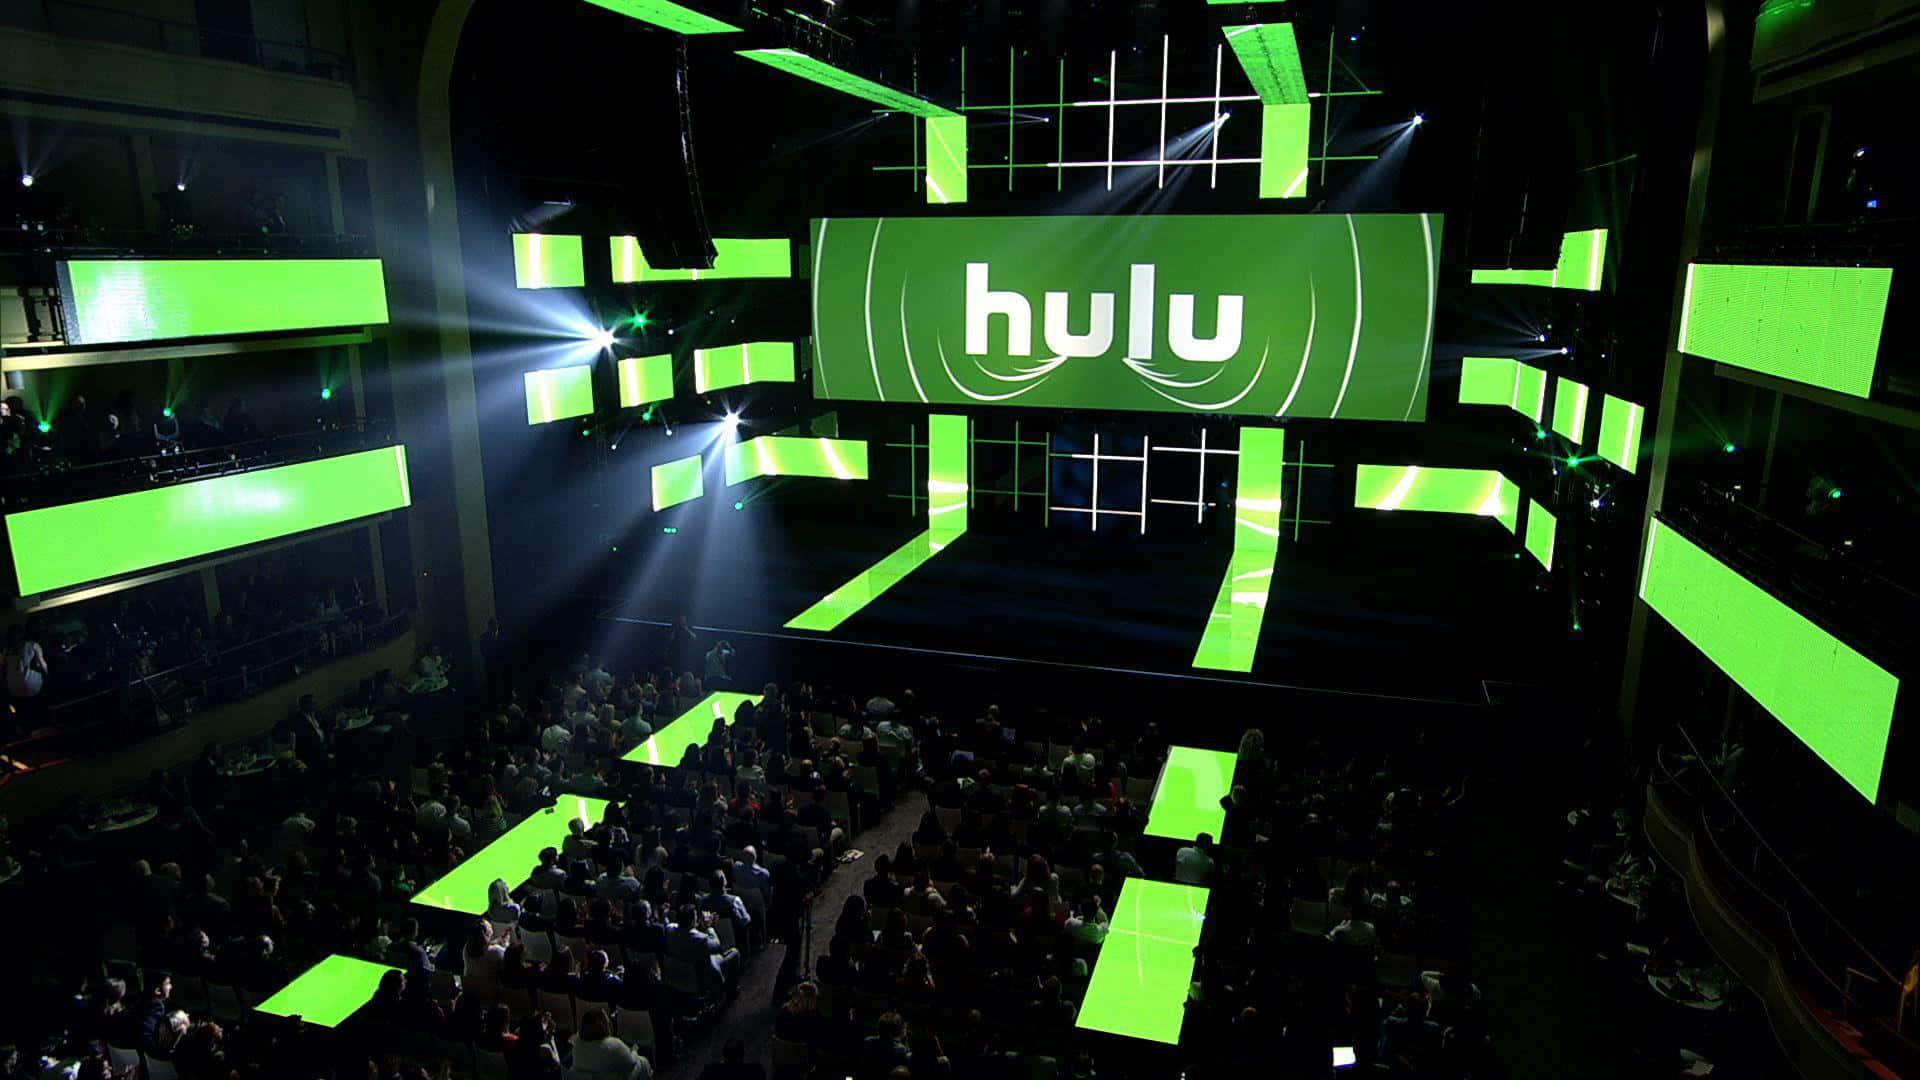 "Experience HULU and its Infinite Possibilities"